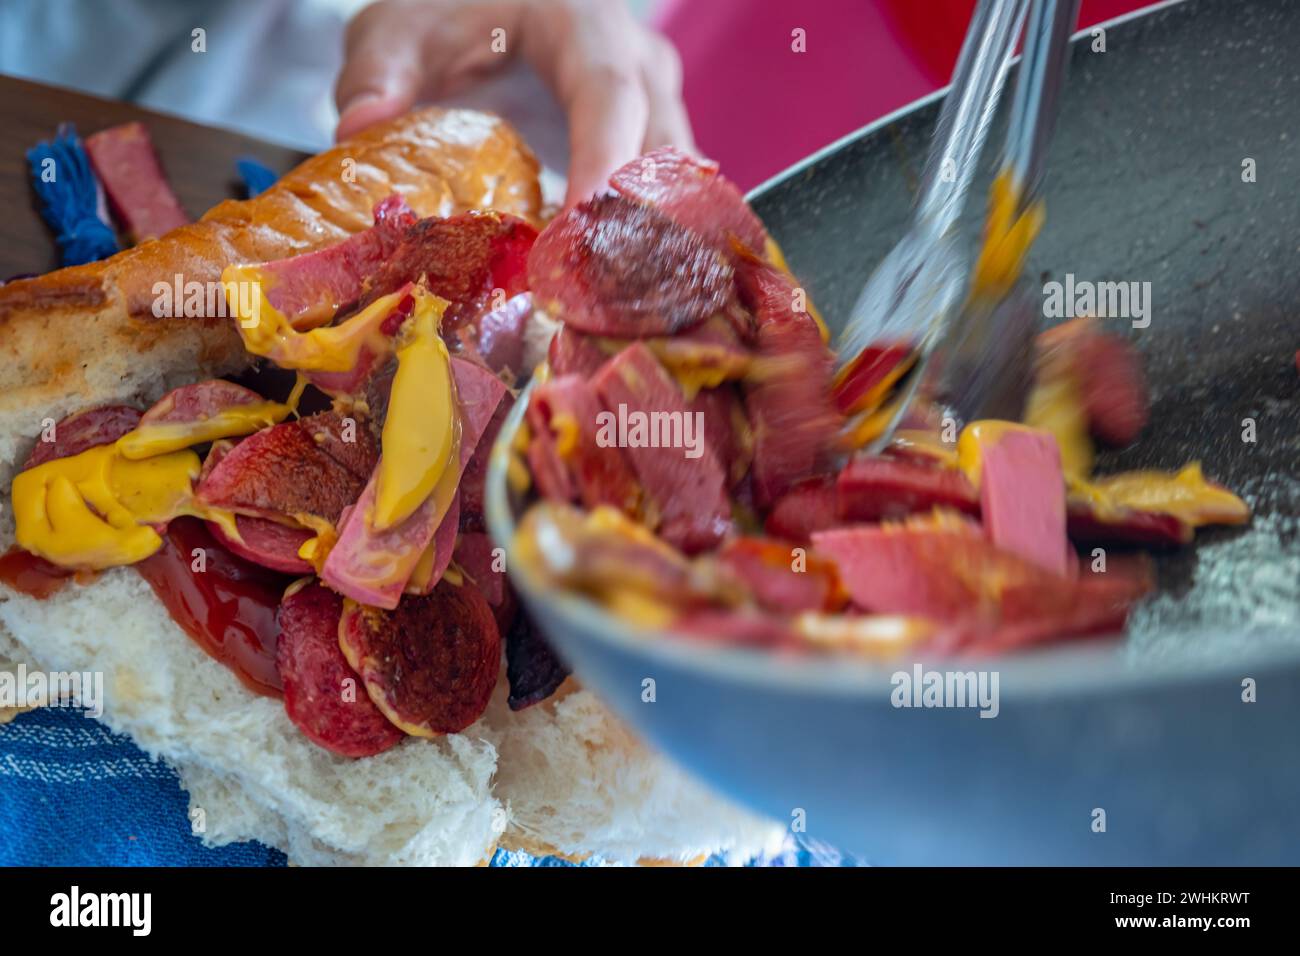 Homemade salami sandwich with cheese Stock Photo